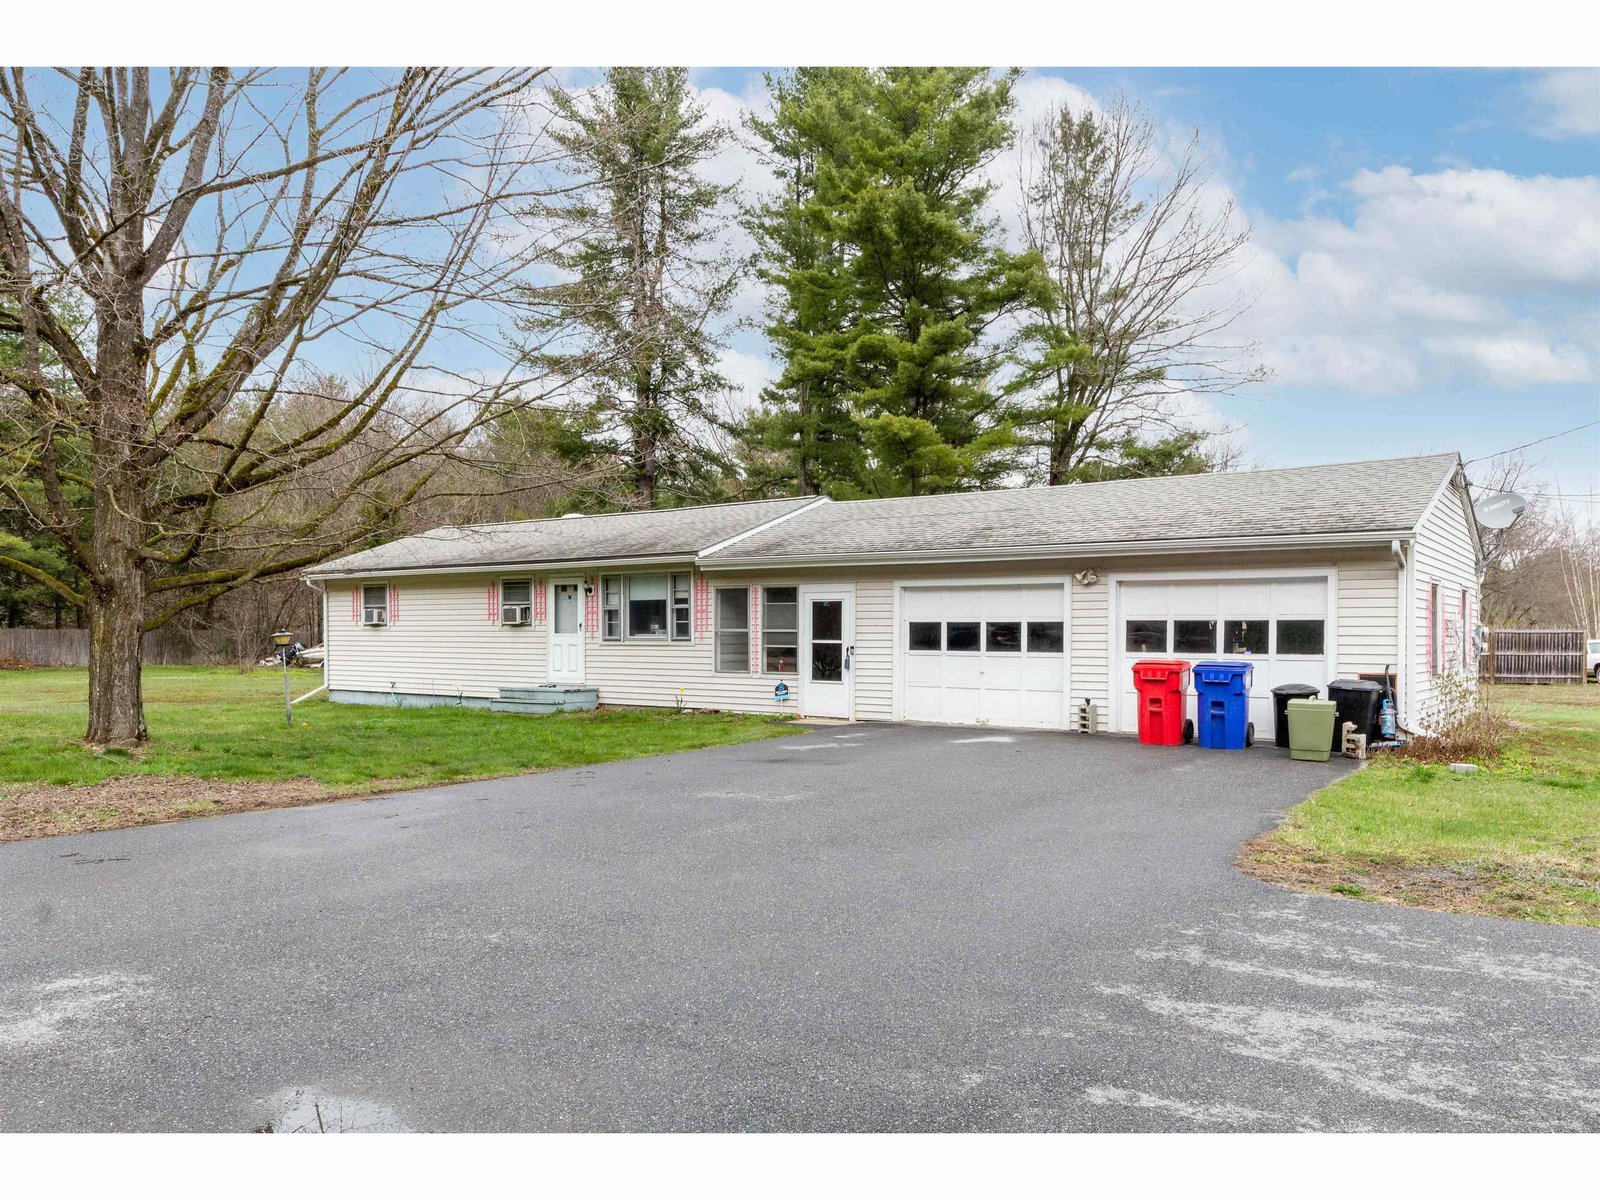 Sold property in Milton